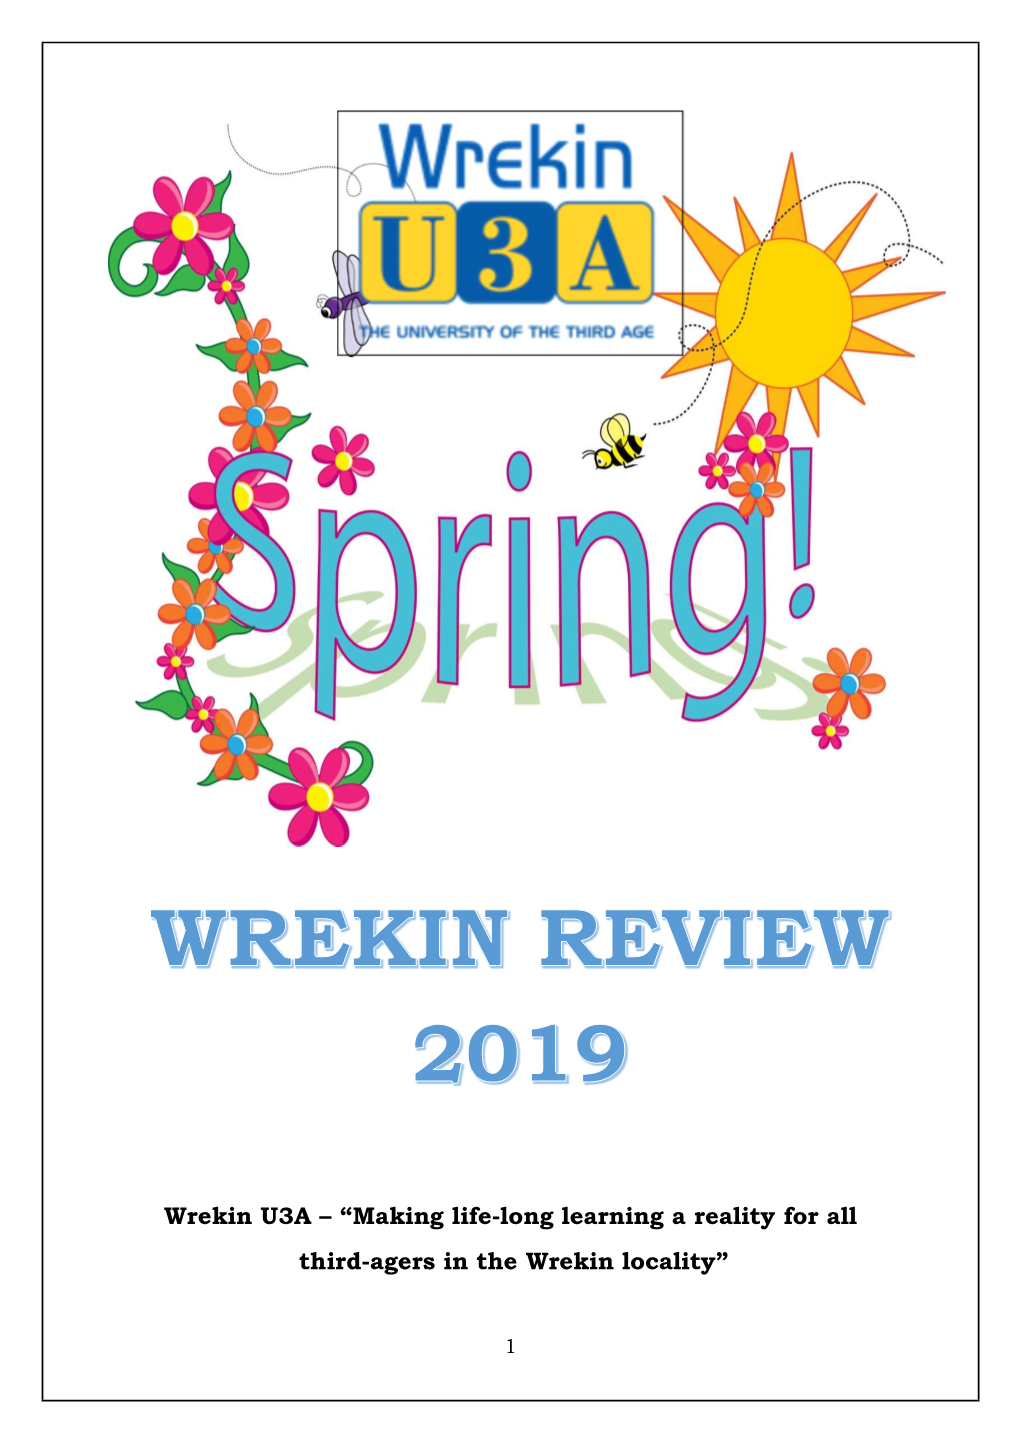 Wrekin U3A – “Making Life-Long Learning a Reality for All Third-Agers in the Wrekin Locality”